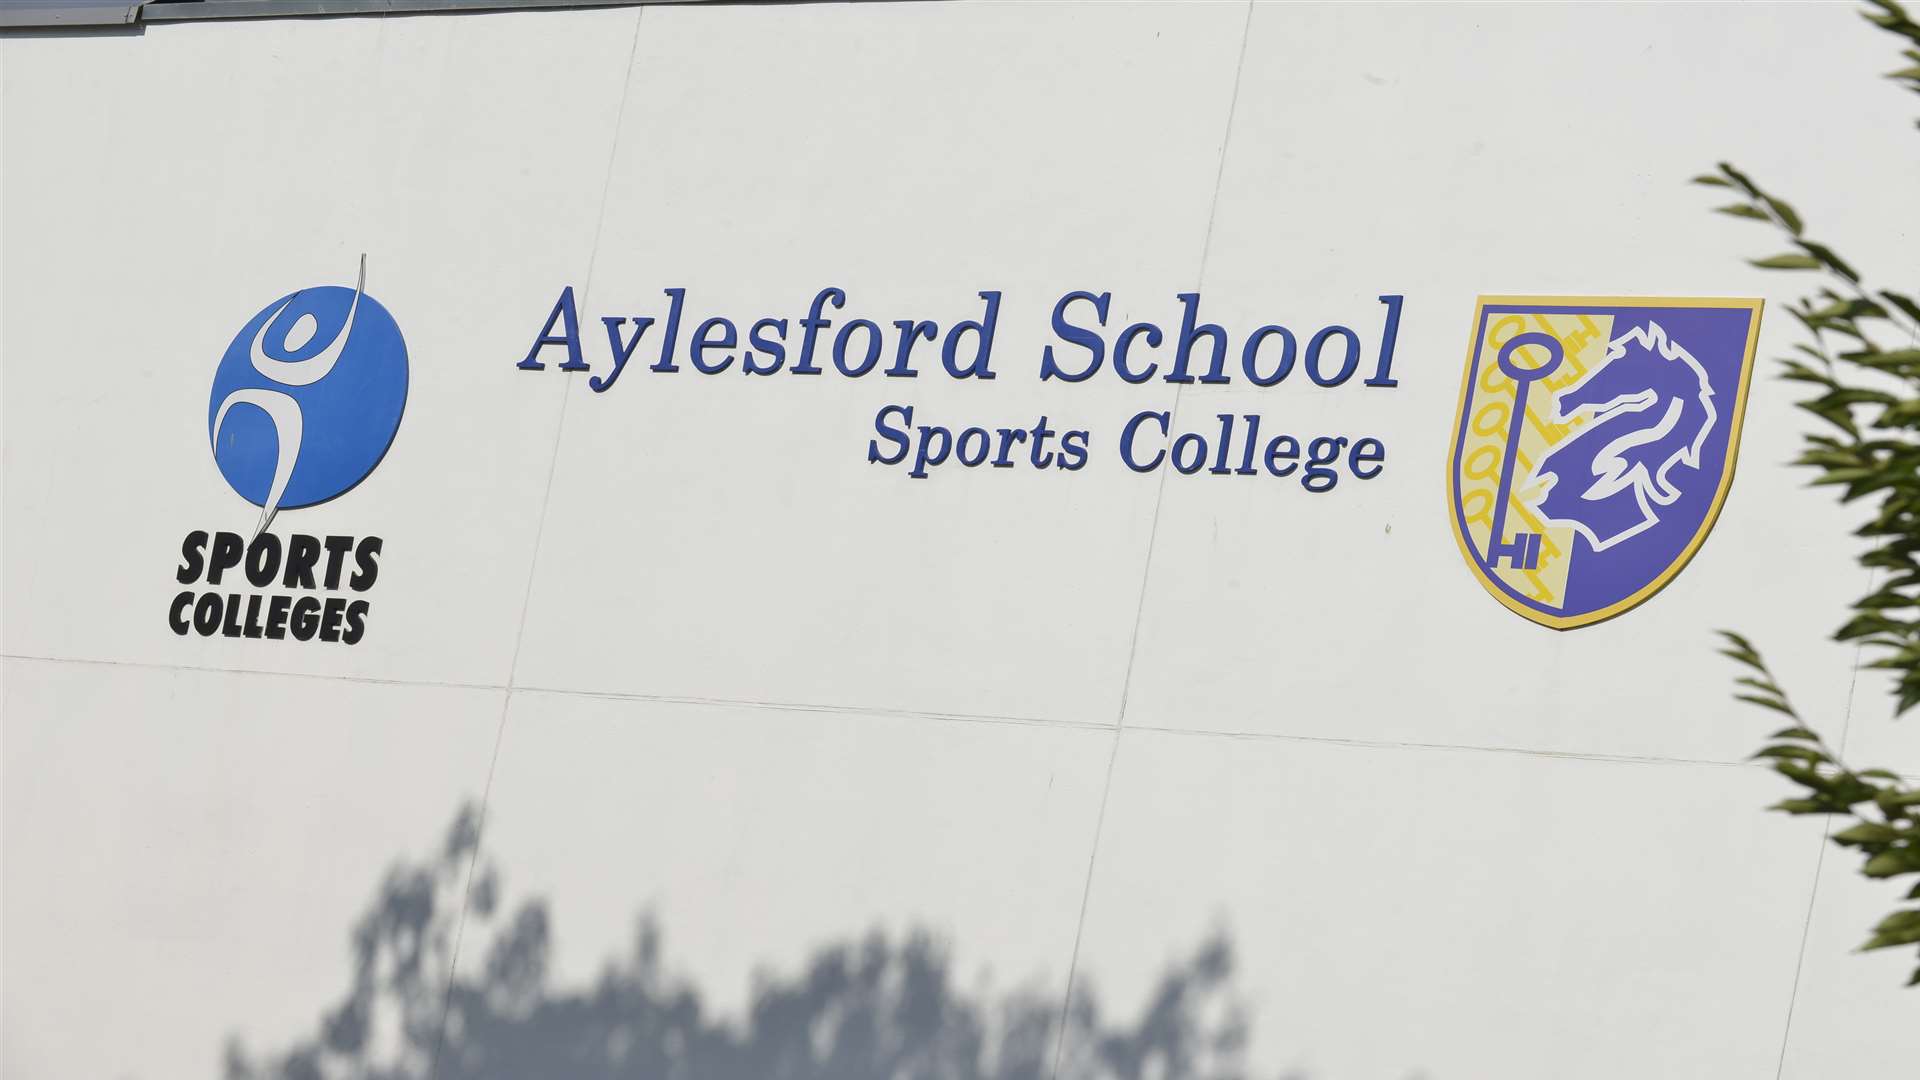 Aylesford School Sports College is the centre of a social media storm.